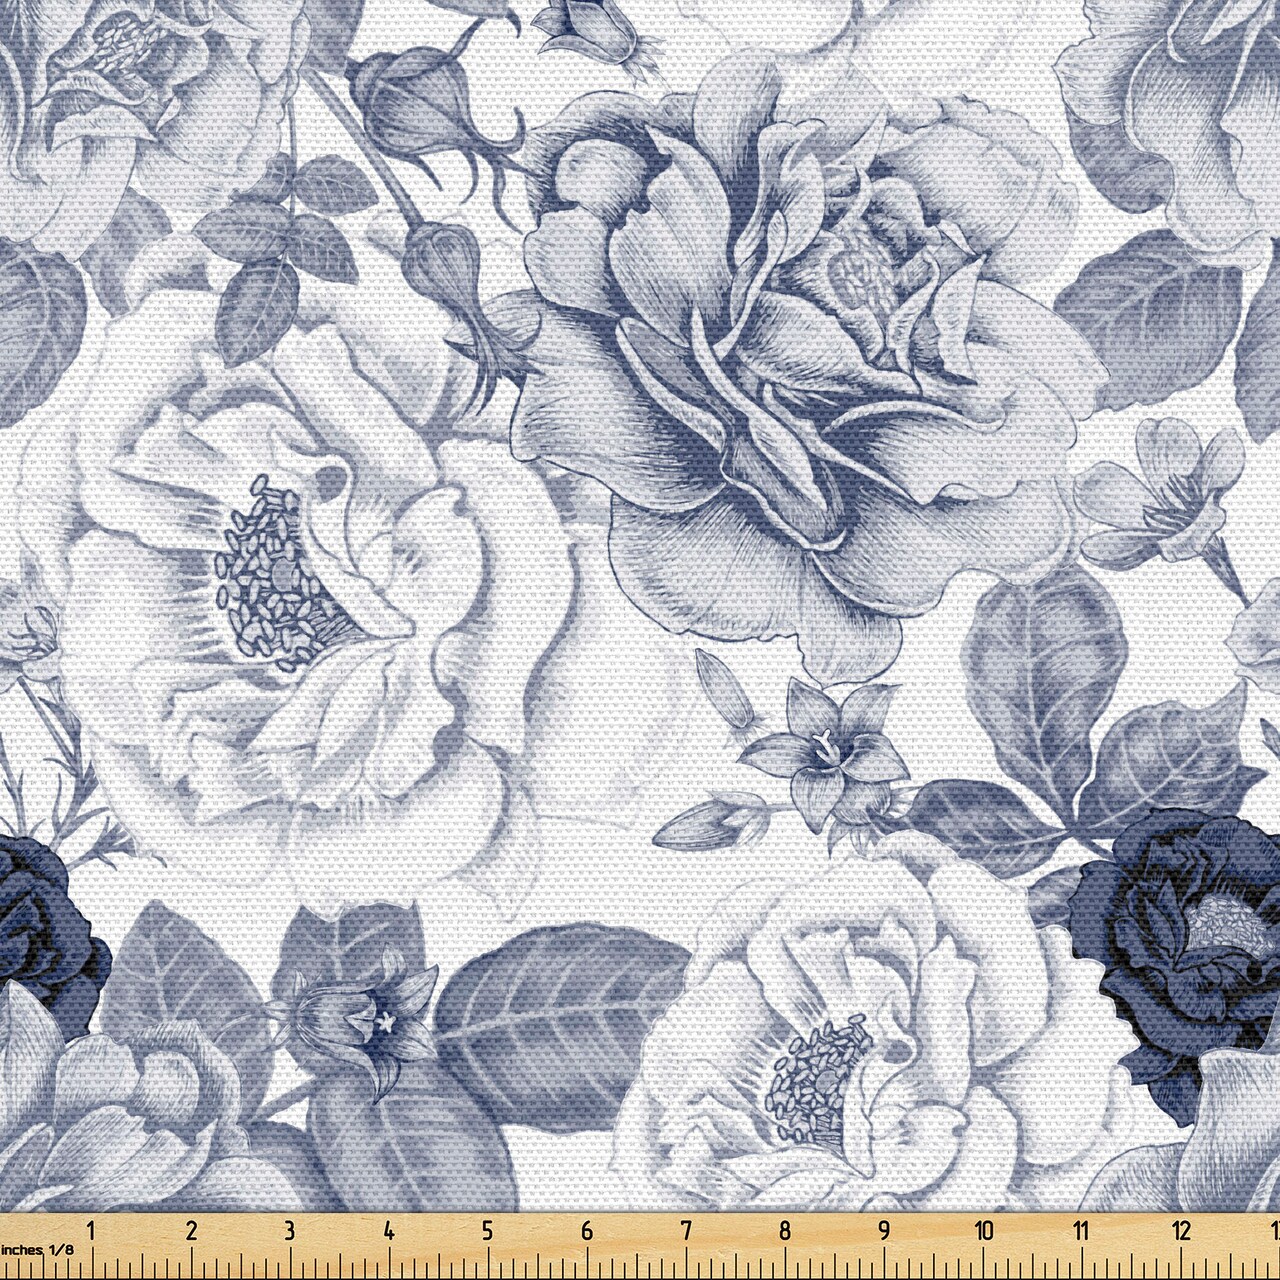 Ambesonne Shabby Flora Fabric by The Yard, Garden Spring Roses Buds with Leaves Flowers Romantic Image Art, Decorative Fabric for Upholstery and Home Accents, 5 Yards, Cadet Blue